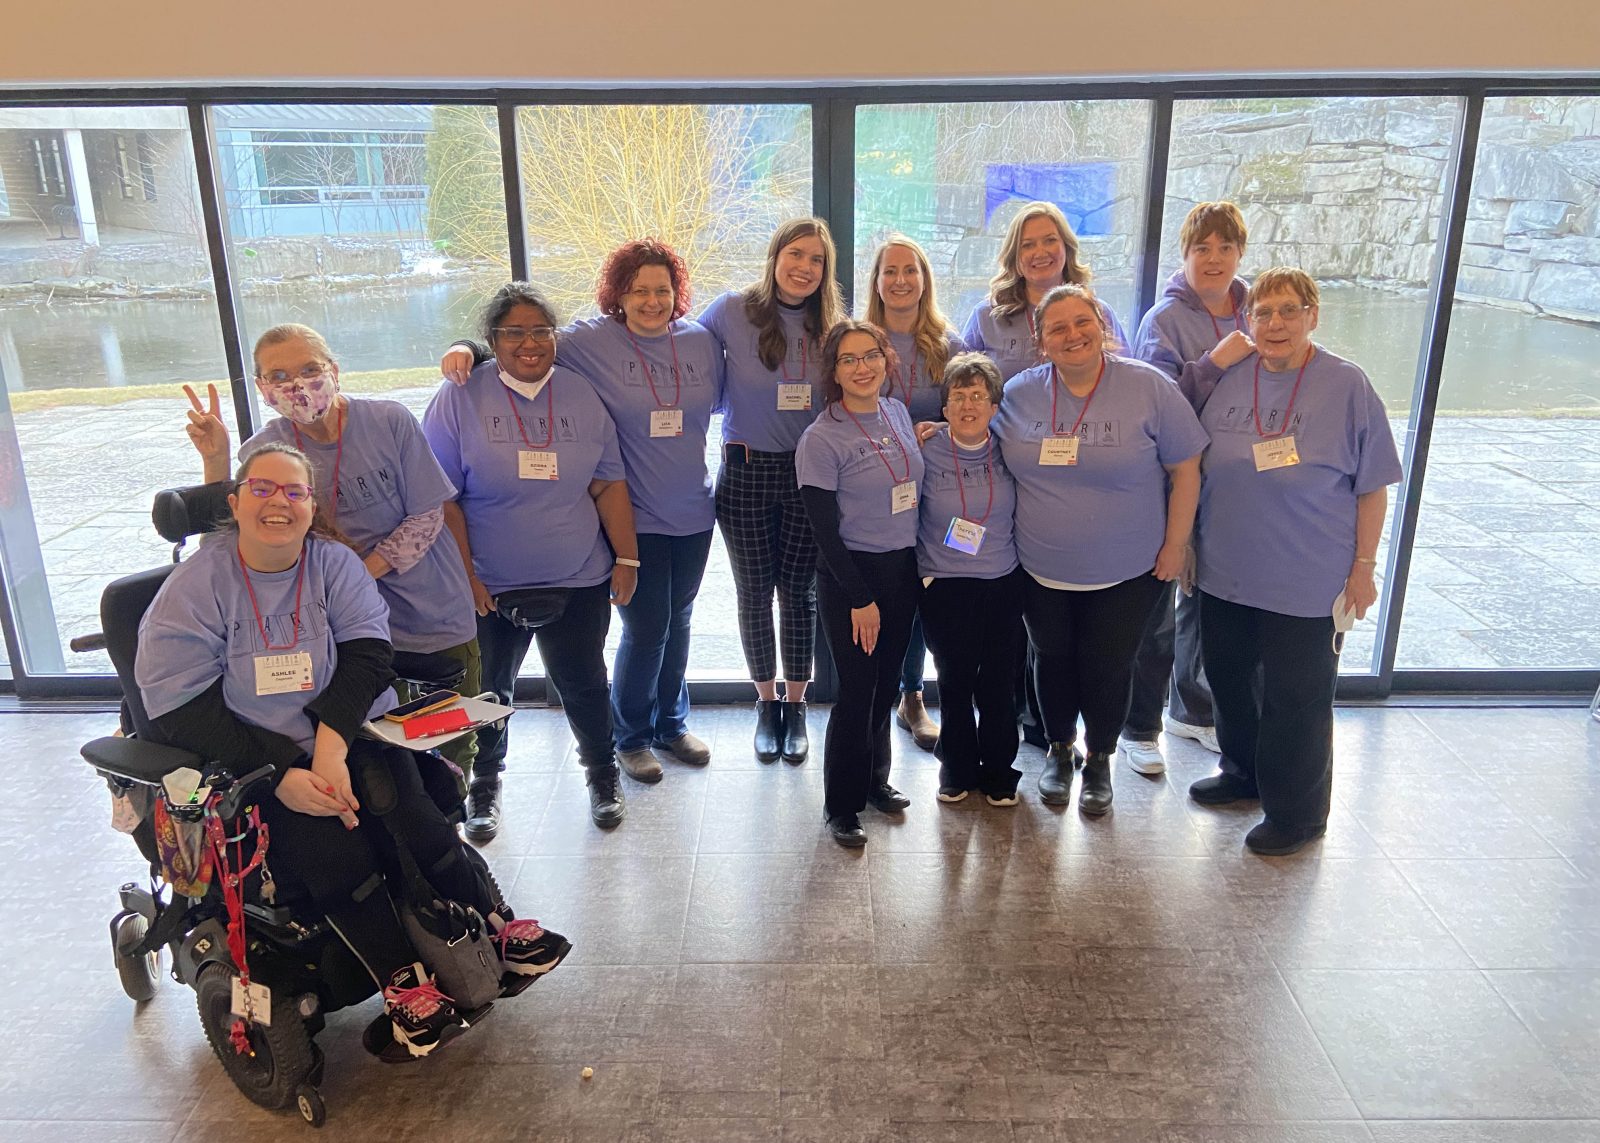 Twelve members of the PARN event planning committee pose in matching purple event t-shirts in front of a wall of windows looking out onto a pond